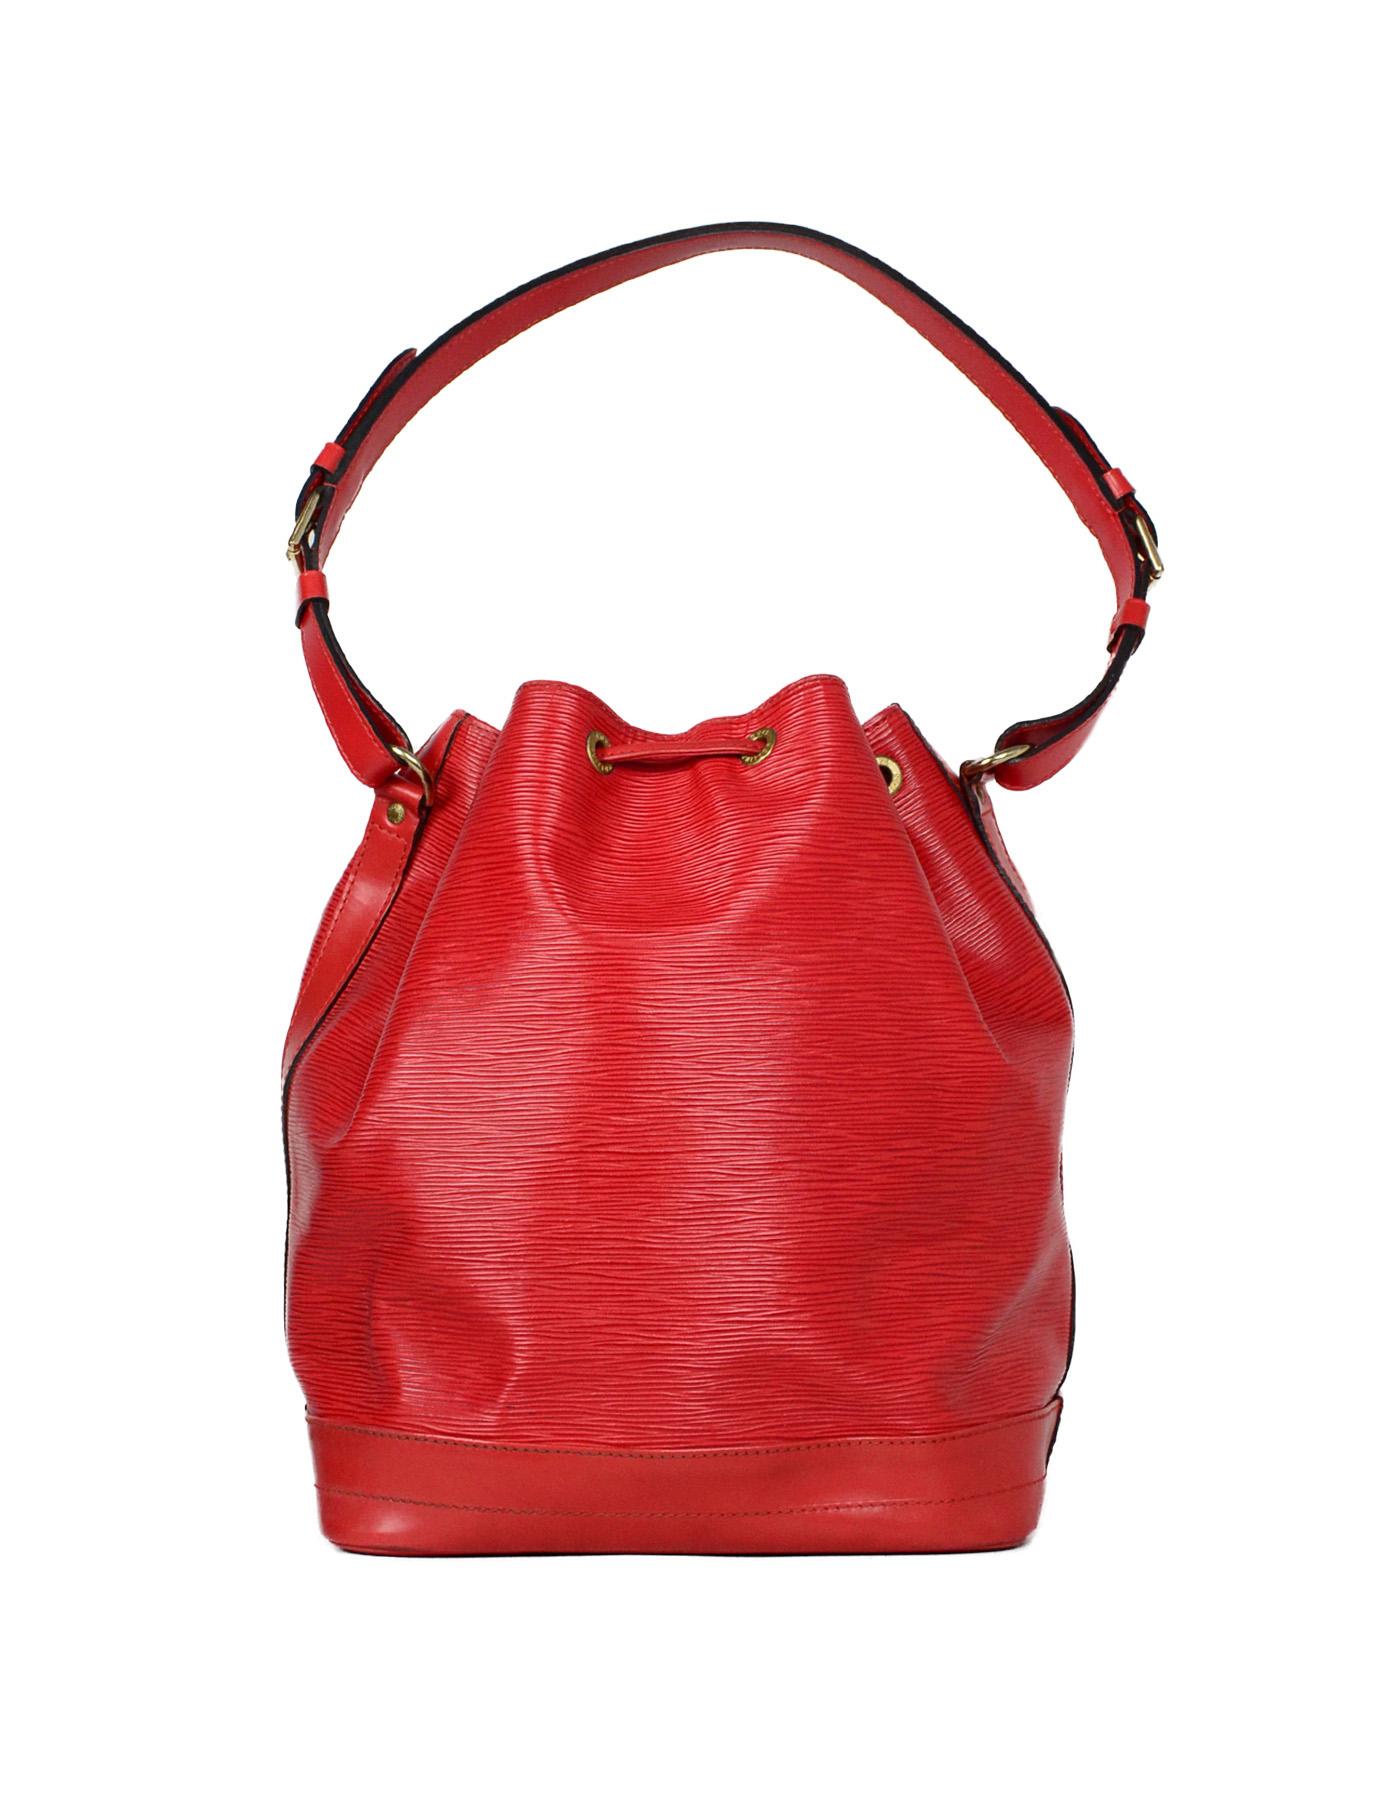 Louis Vuitton Red Epi Leather Noe GM Bucket Bag

Made In: France
Year of Production: 1995
Color: Red
Hardware: Goldtone
Materials: Epi leather
Lining: Red alcantara 
Closure/Opening: Drawstring
Exterior Pockets: None
Interior Pockets: None.  D-ring